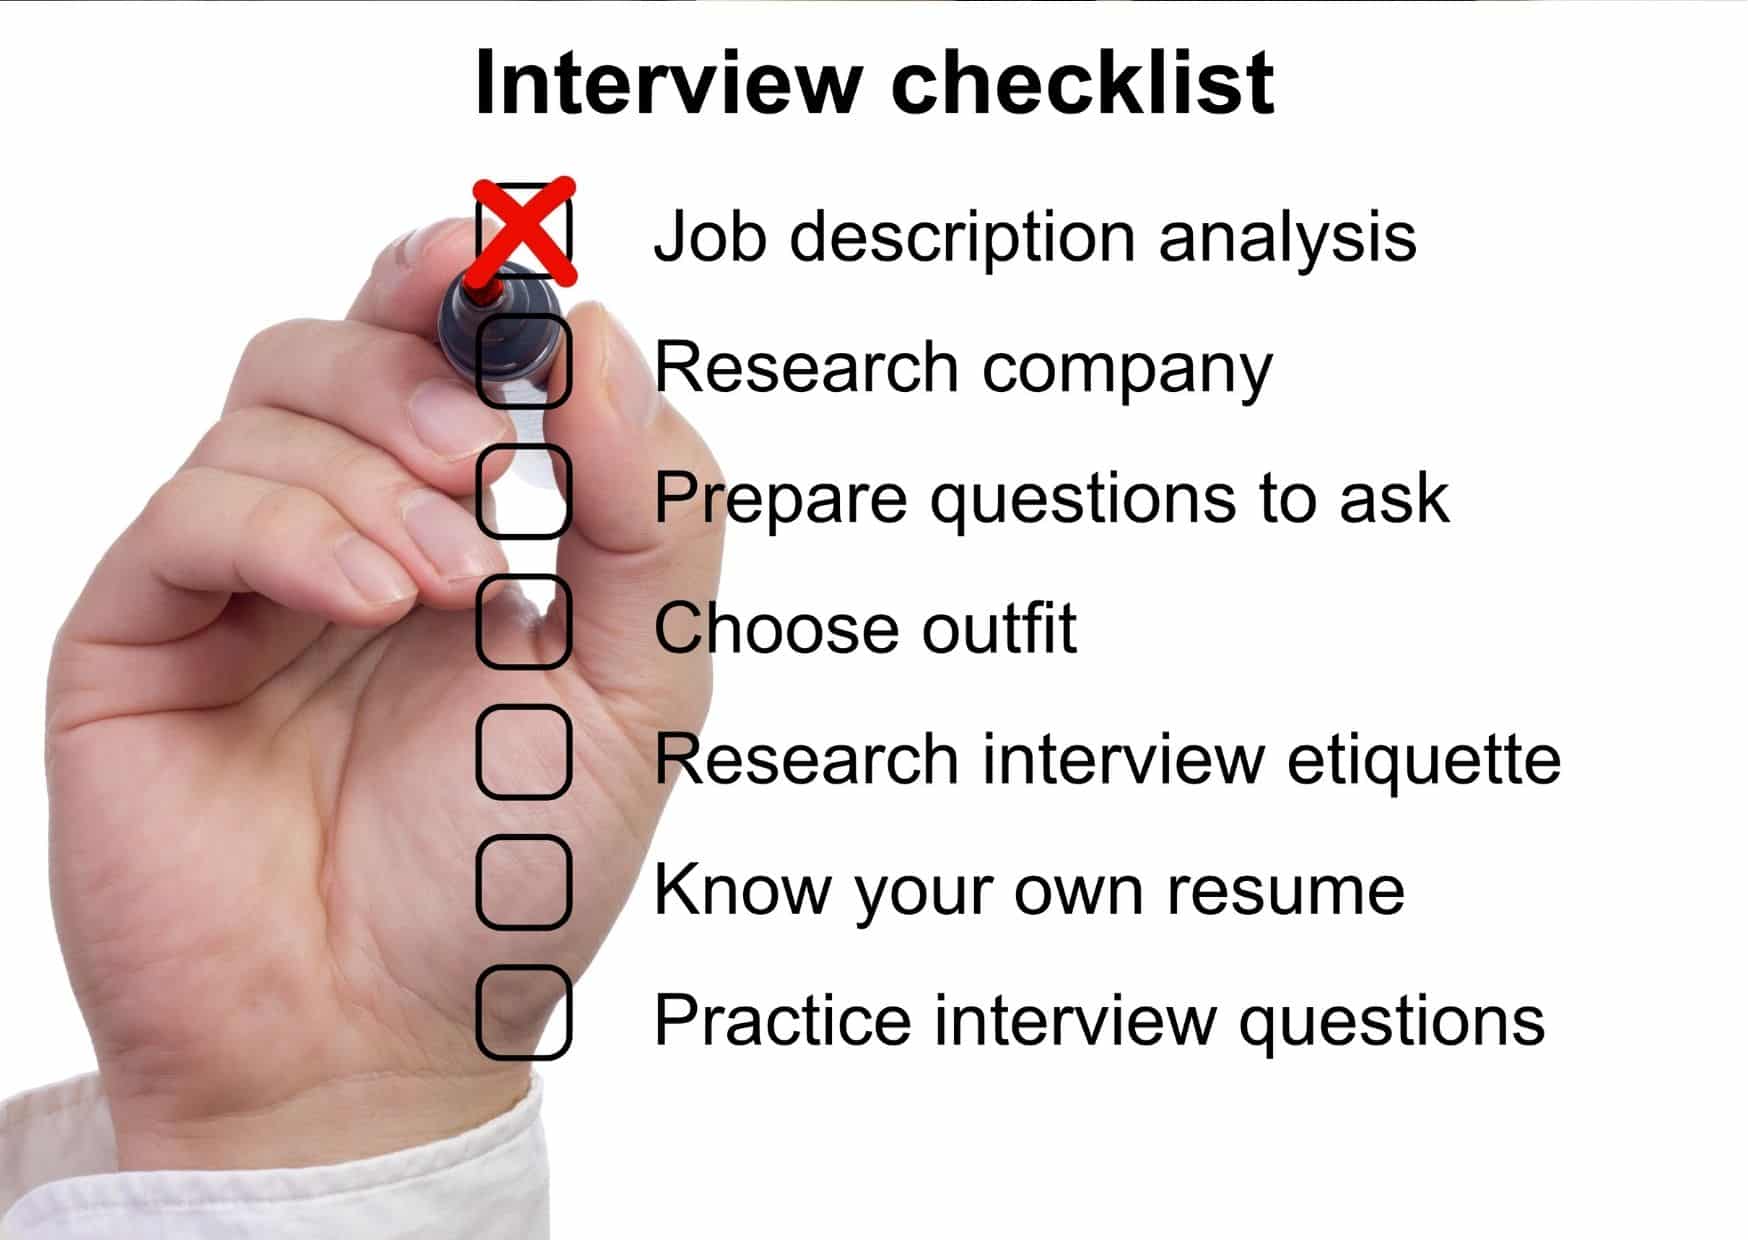 Interview checklist: stay positive